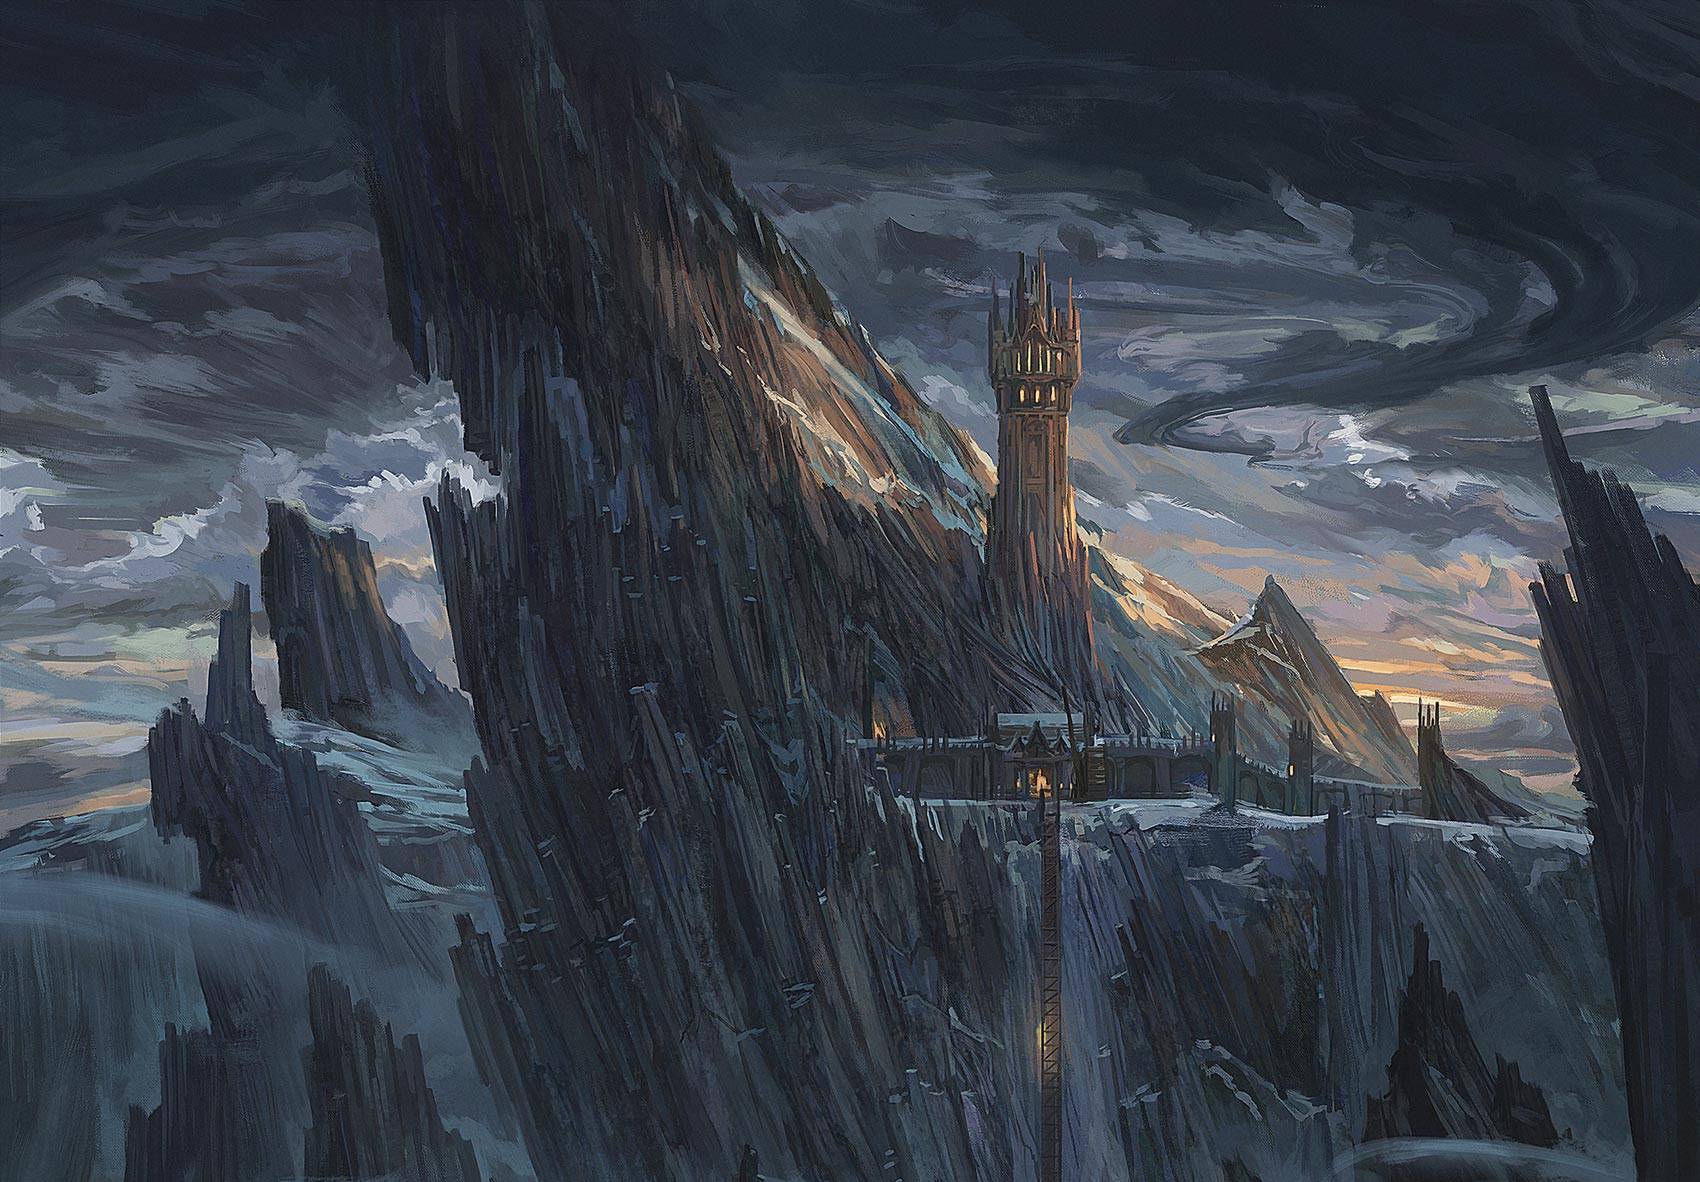 A keep made of stone stands among stone peaks and snow.